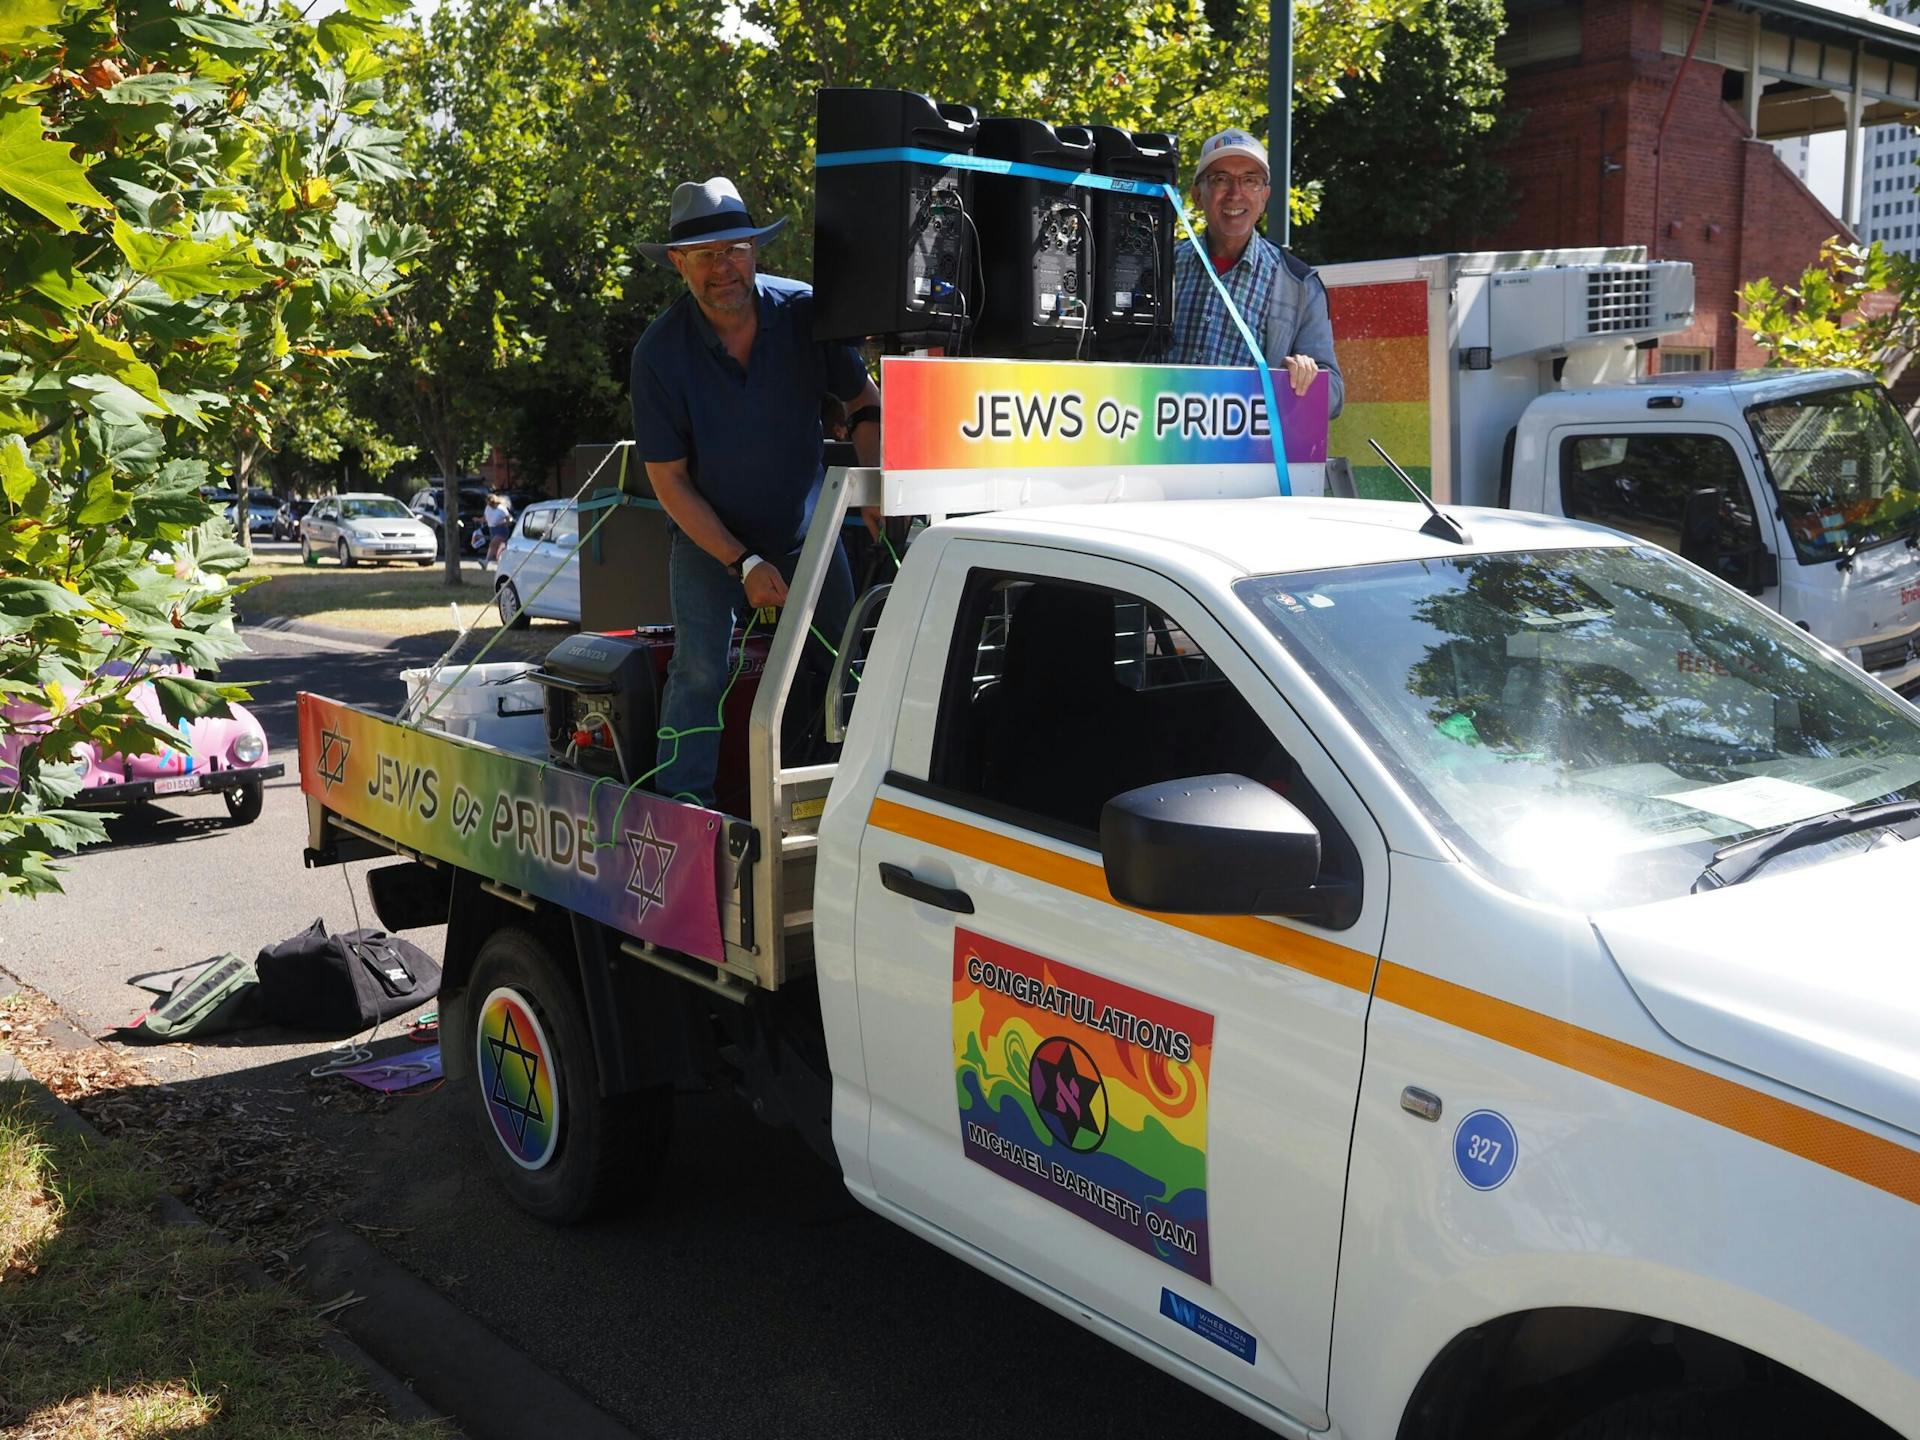 Jews of Pride's famous "sound truck" plays Jewish music on the pride march. Image: Michael Barnett/Supplied. 